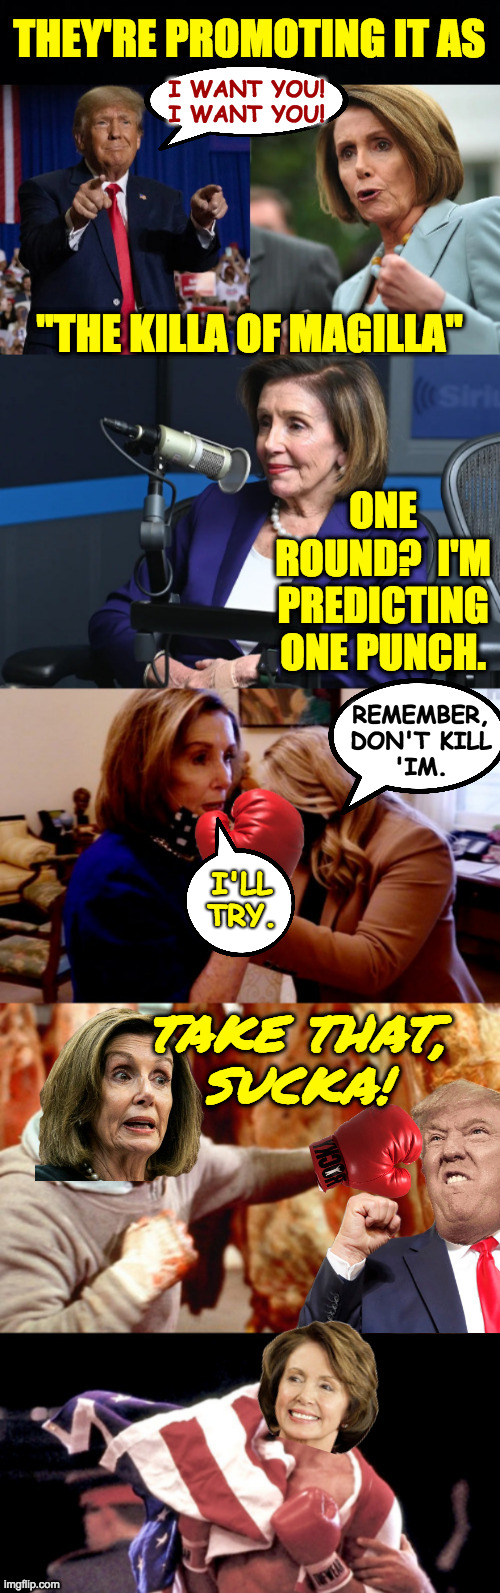 Ain't gonna be no rematch. | I WANT YOU!
I WANT YOU! REMEMBER,
DON'T KILL
'IM. I'LL TRY. TAKE THAT,
SUCKA! | image tagged in memes,nancy pelosi,magilla gorilla | made w/ Imgflip meme maker